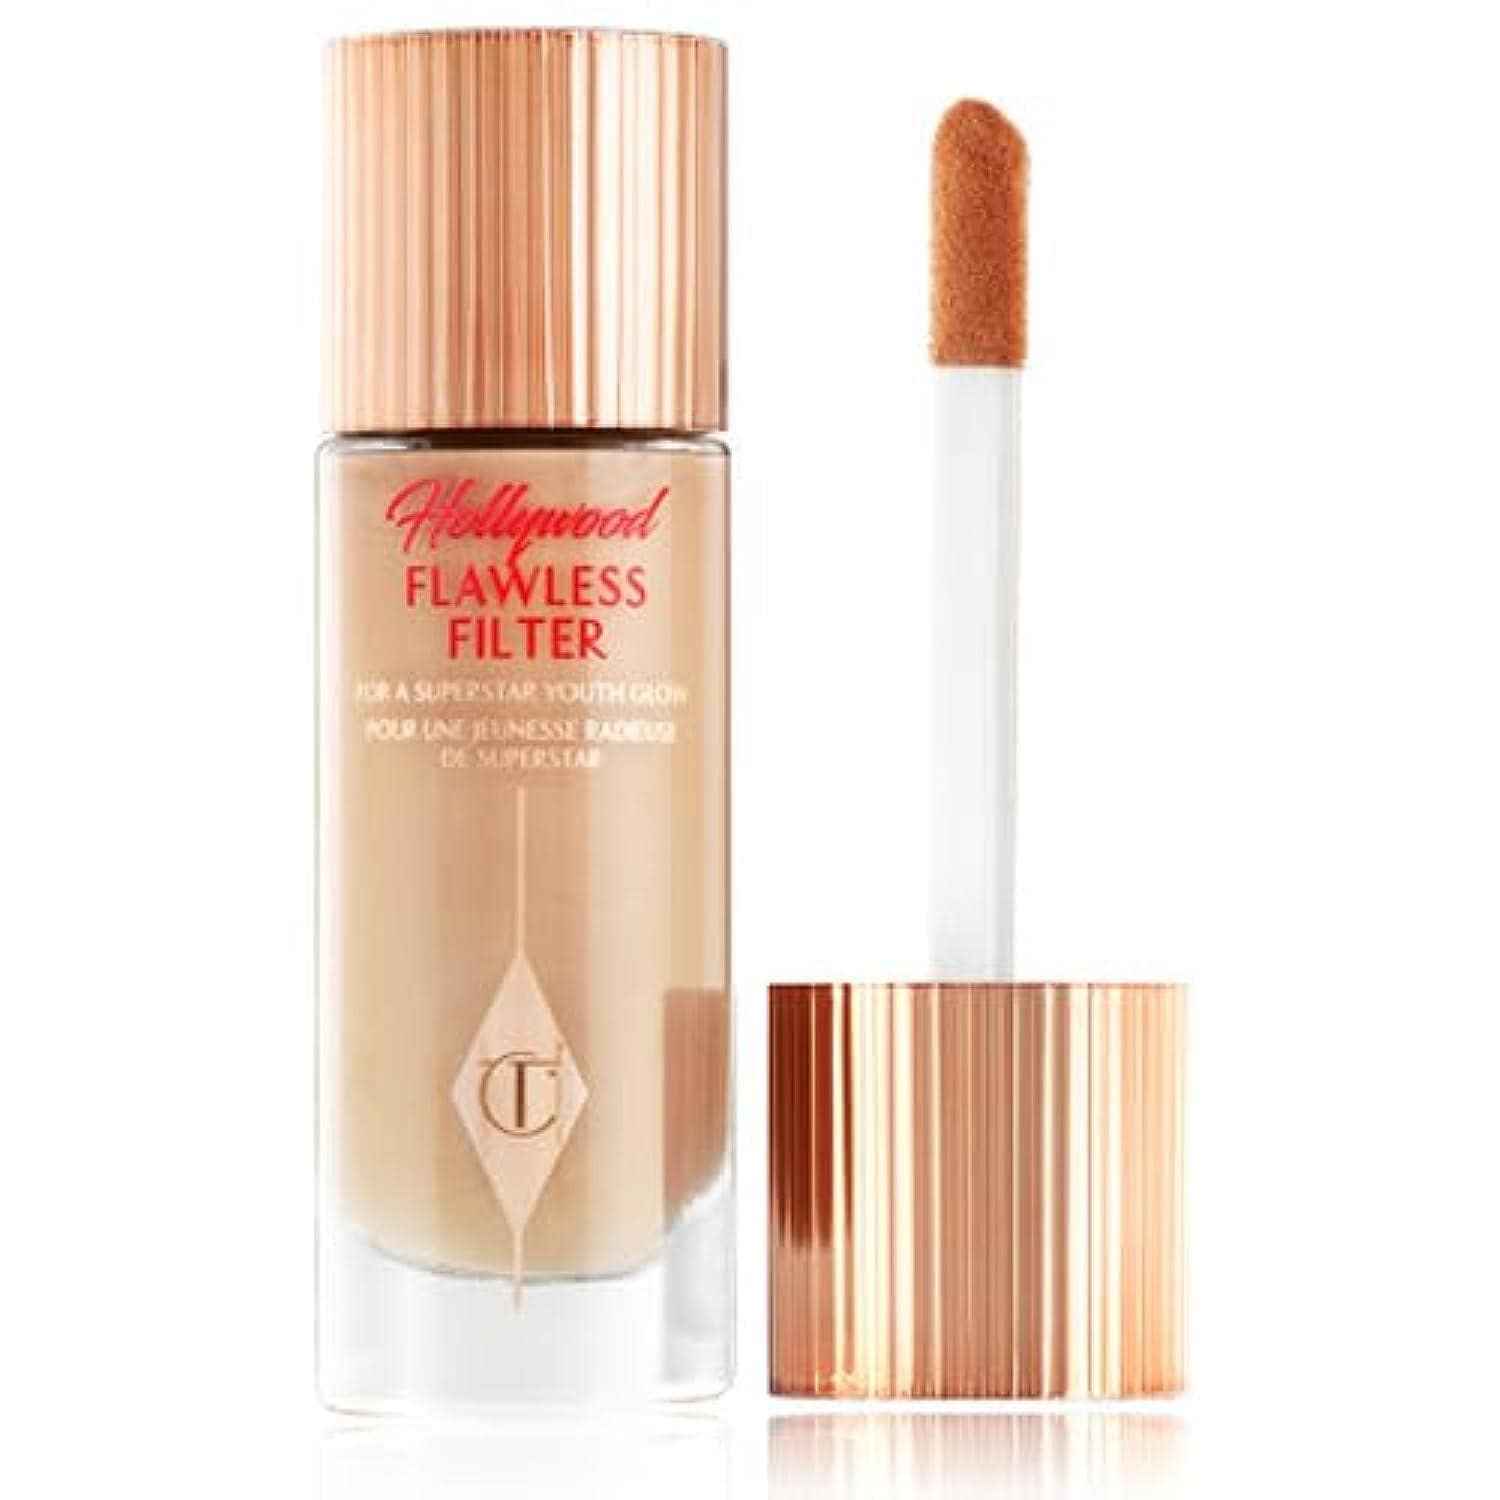 Charlotte Tilbury Hollywood Flawless Filter is one of the best shade of Charlotte Tilbury Foundation as per my view.